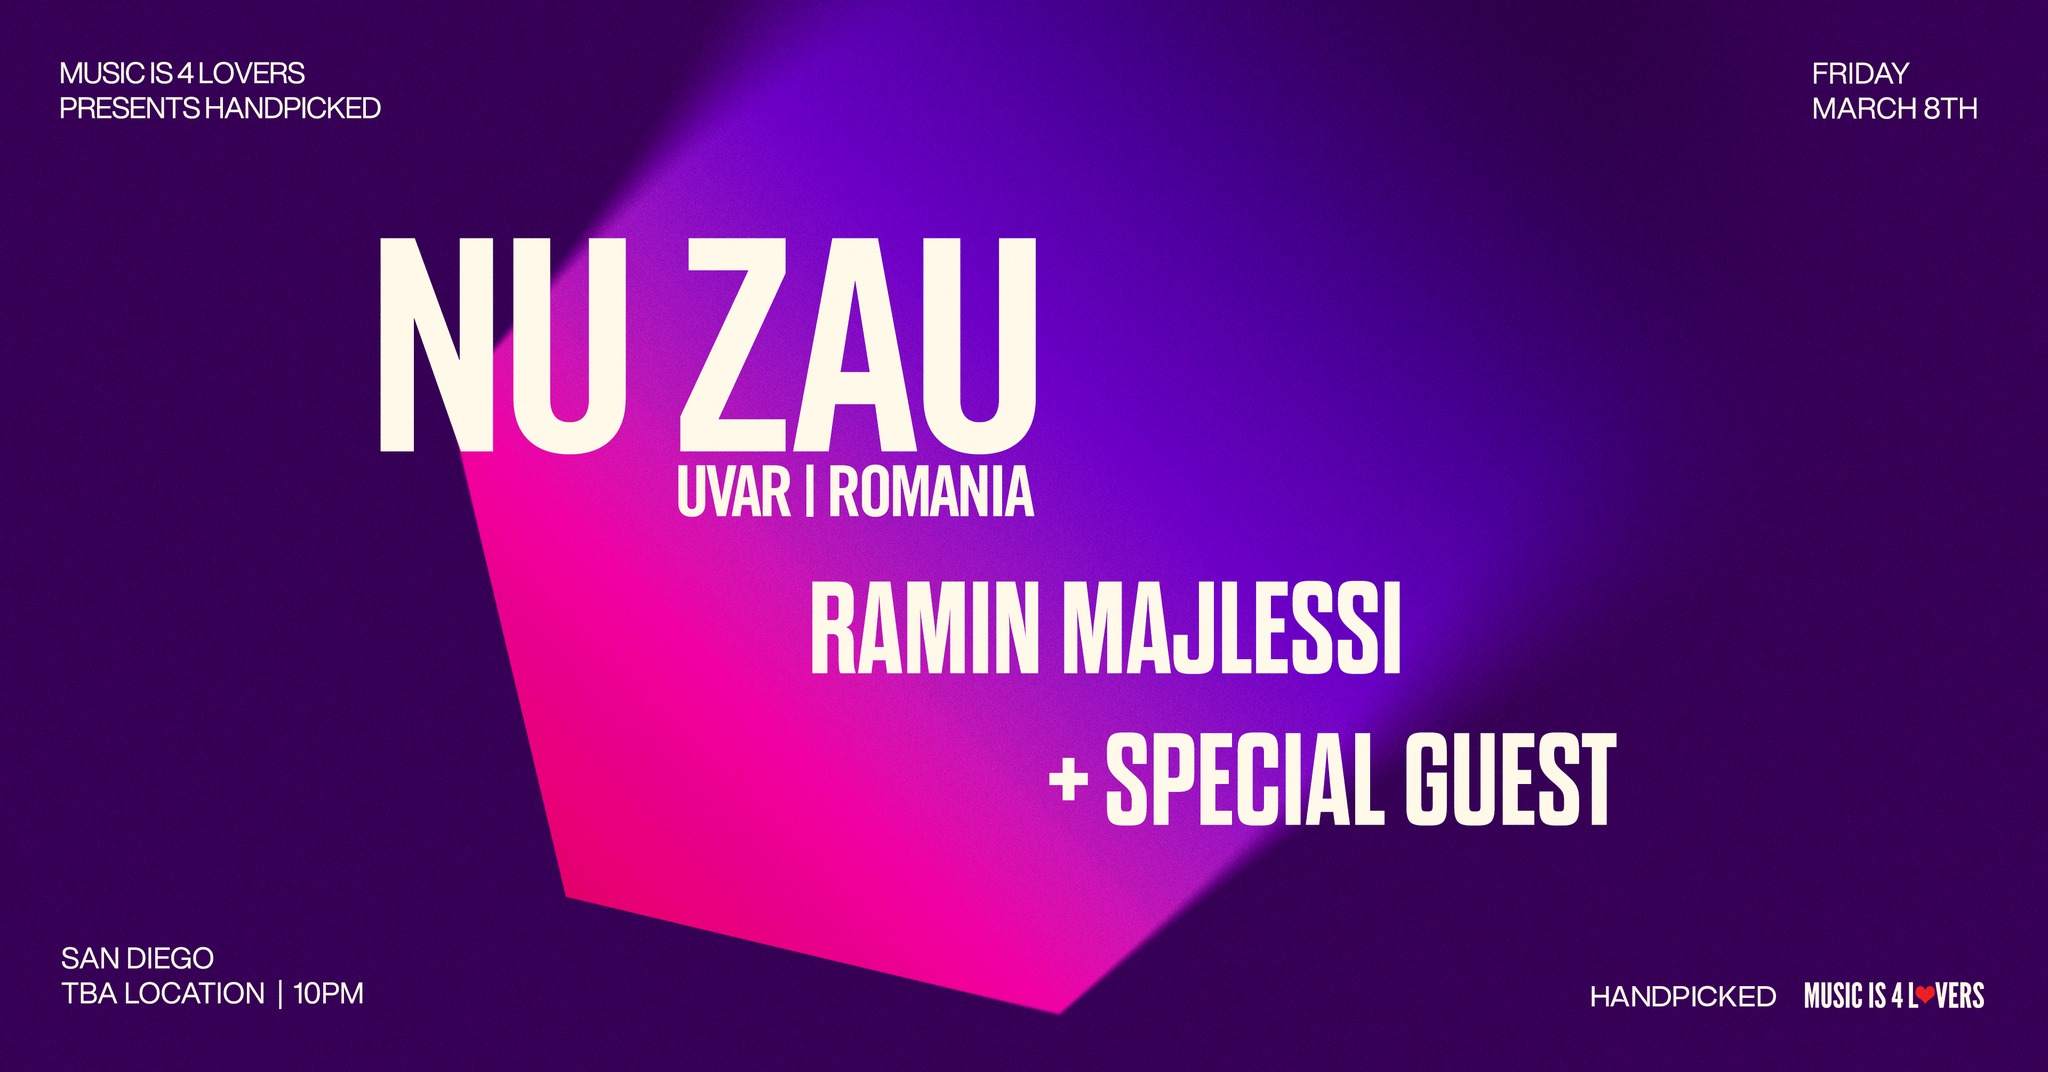 Music is 4 Lovers presents..Handpicked with Nu Zau + Ramin Majlessi + Special Guest - フライヤー表